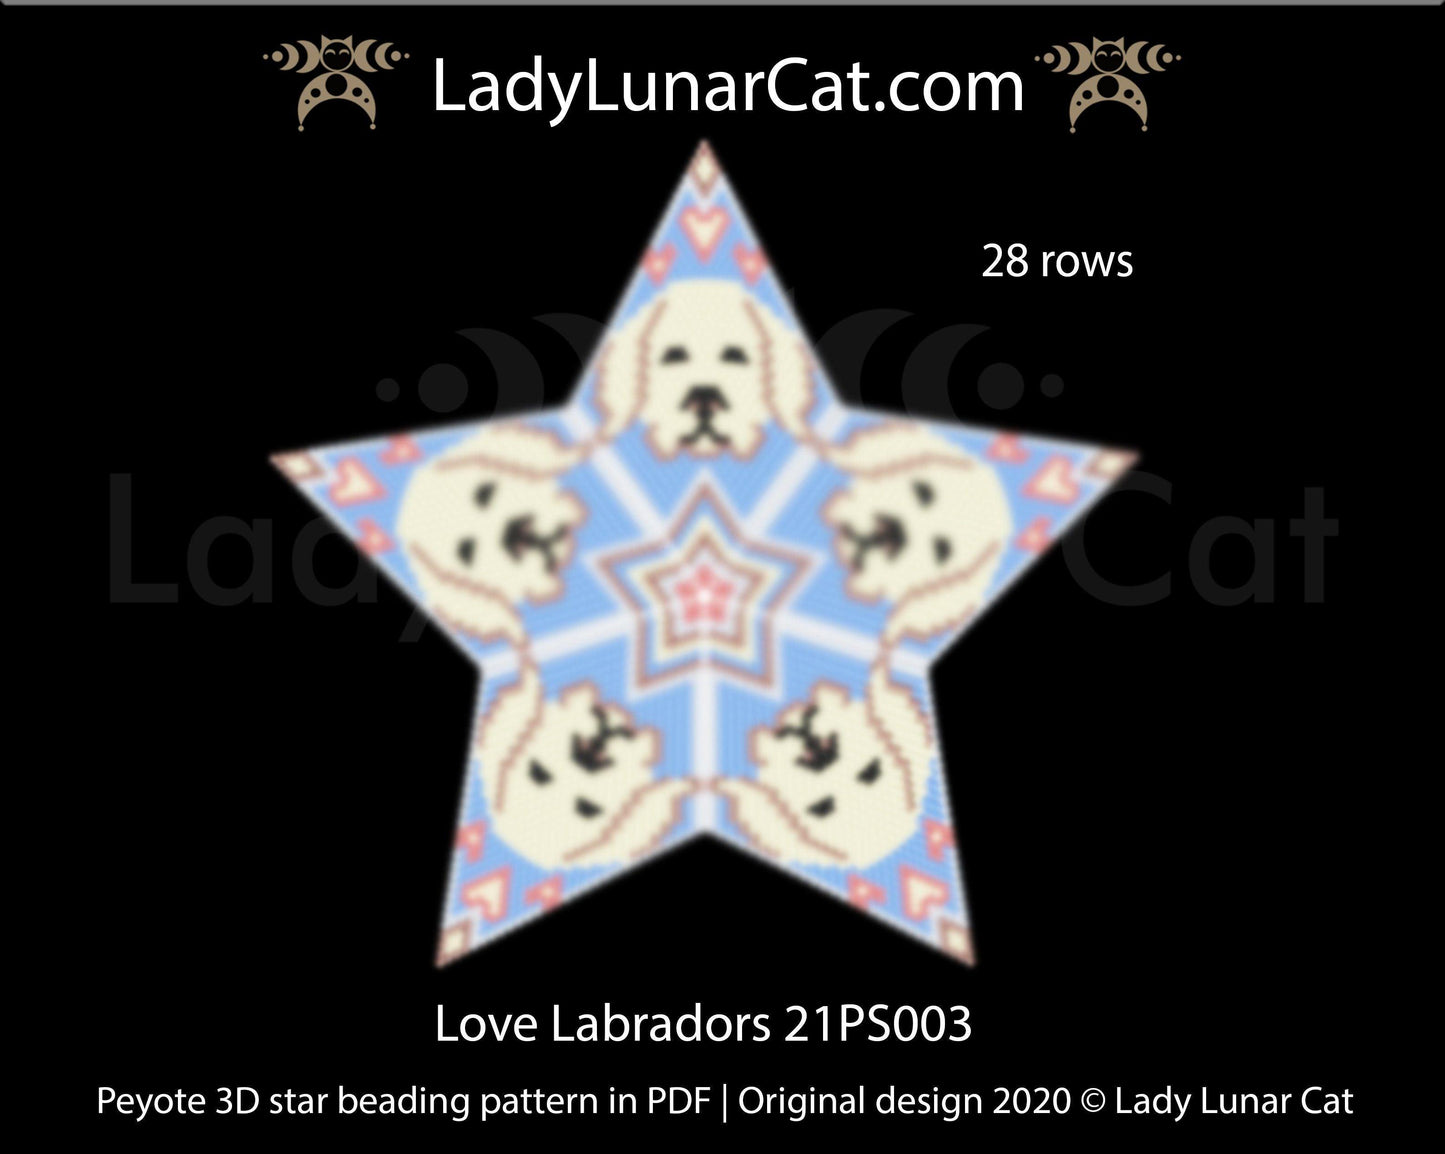 Beaded star pattern - Love Labradors 21PS003 | Seed beads tutorial for 3D peyote star LadyLunarCat